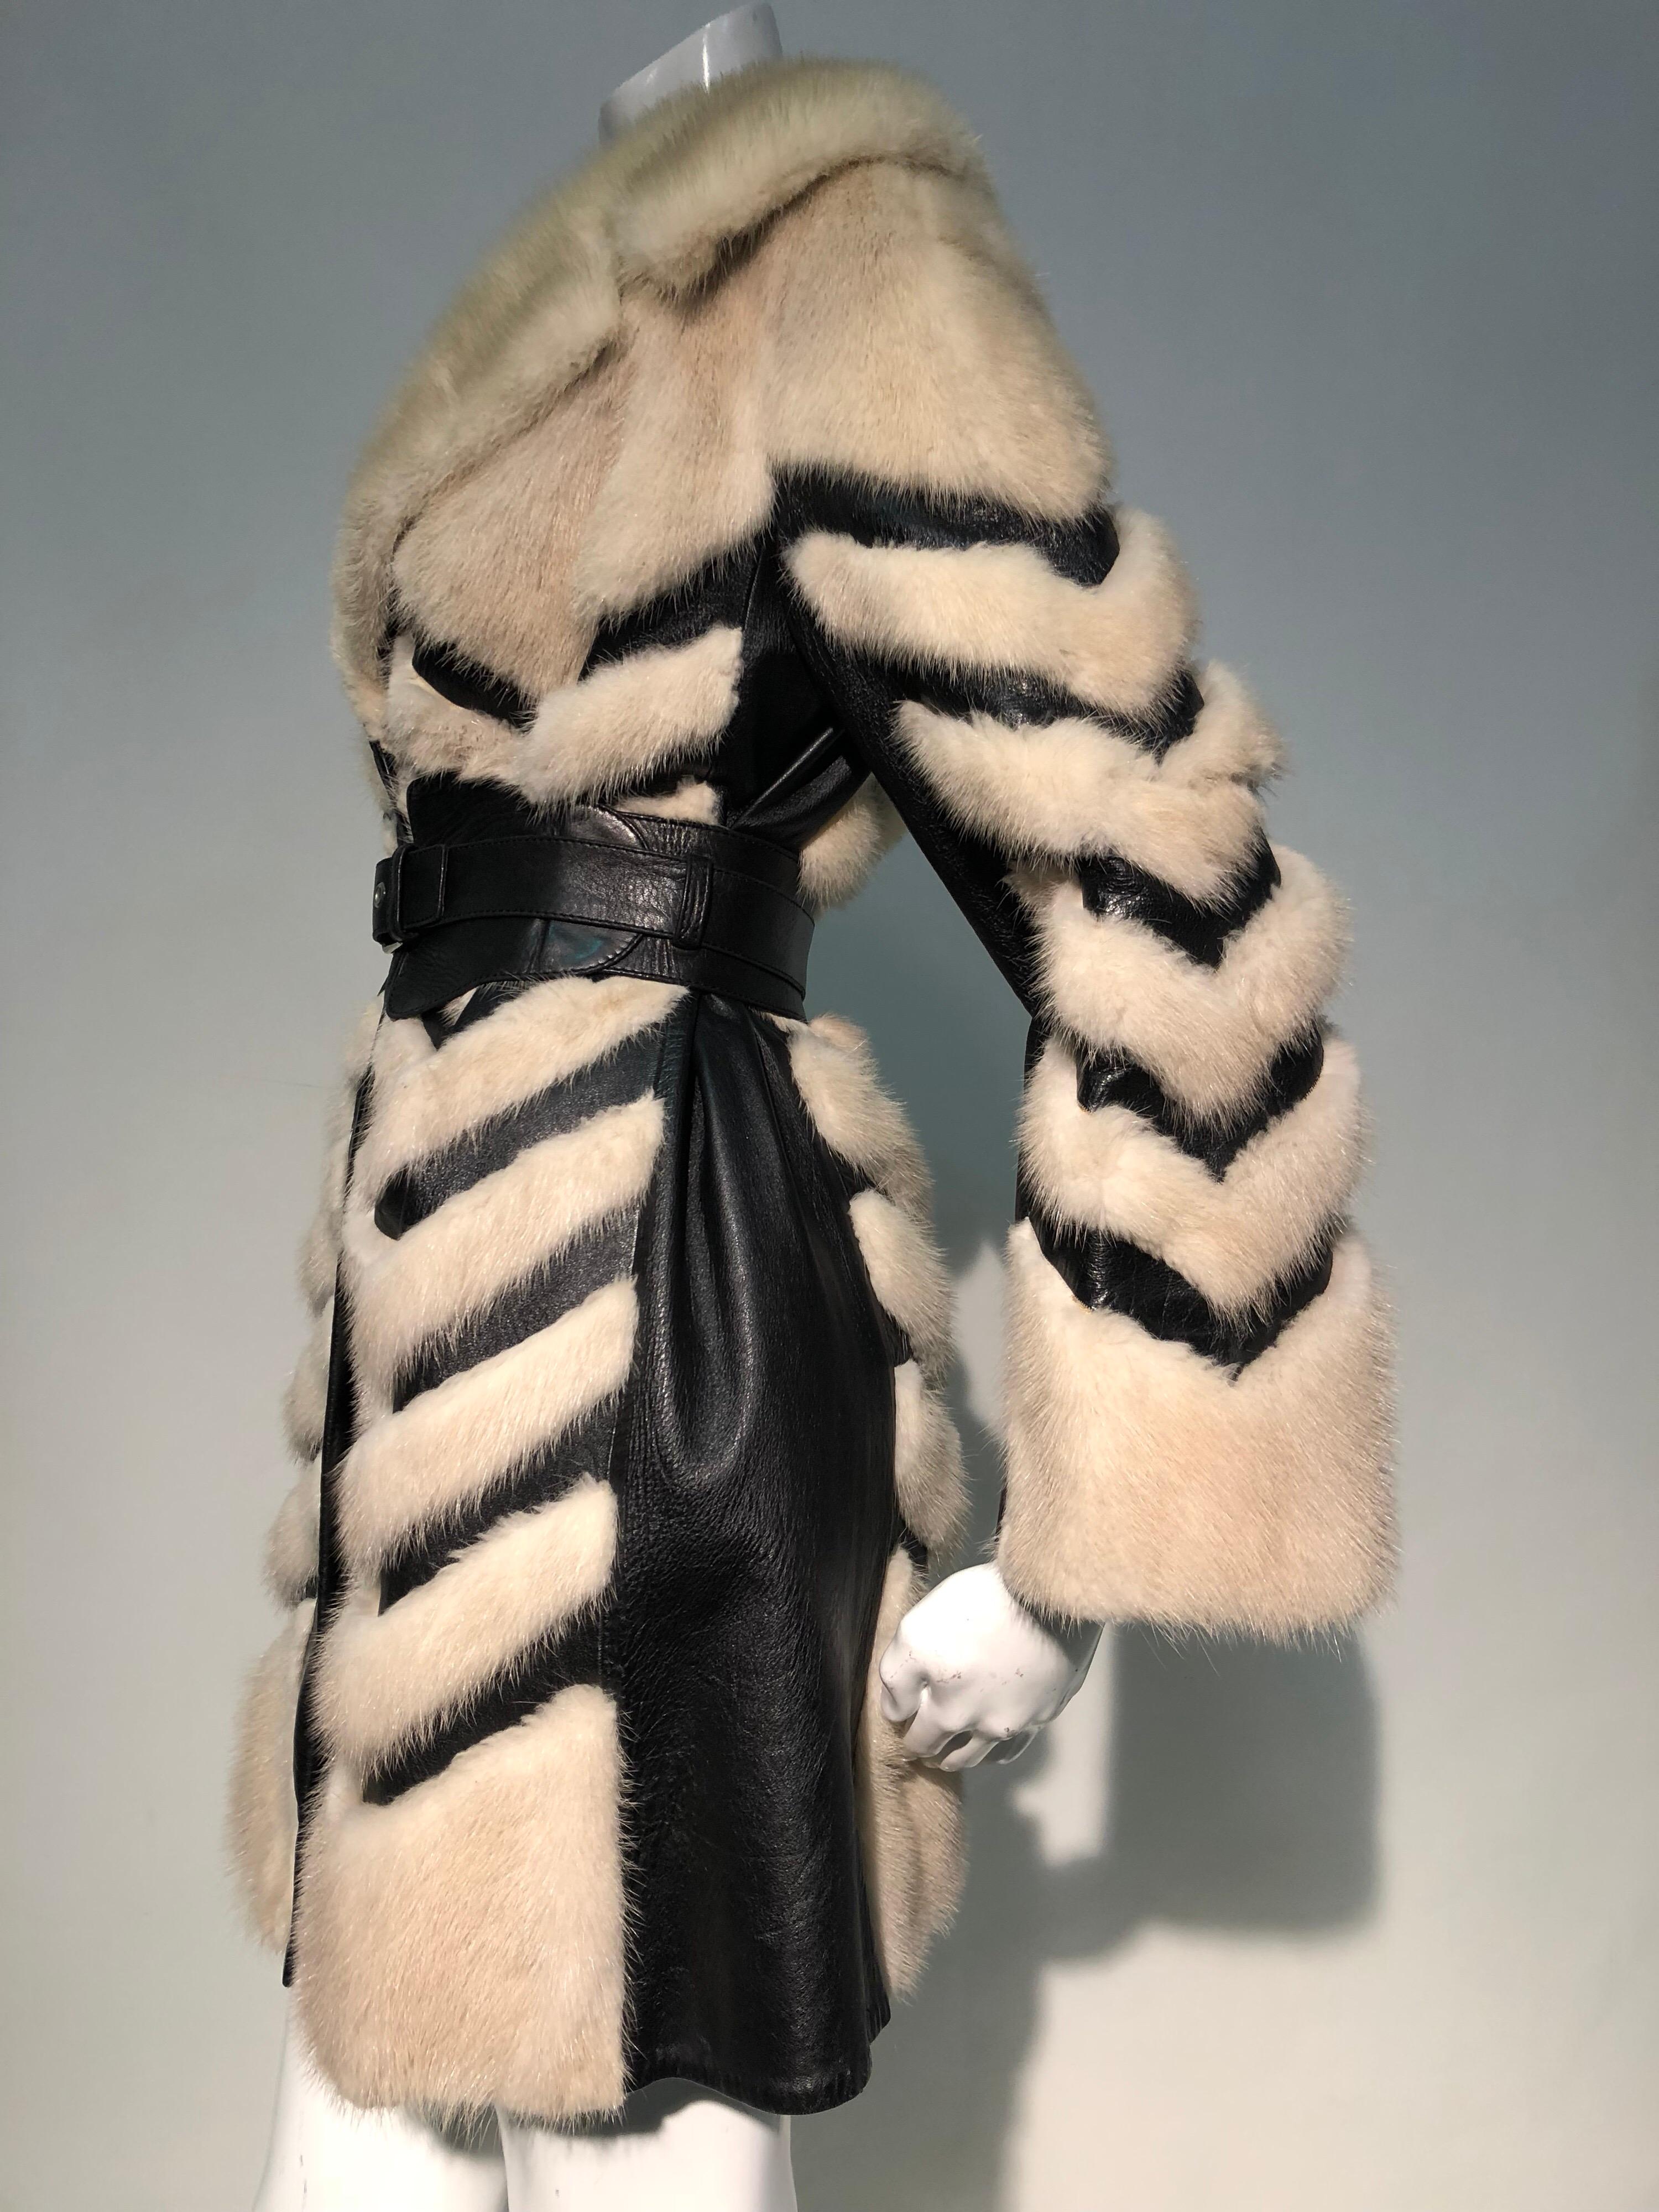 A striking 1960s honey blonde mink and black leather Mod styled coat with intricately pieced chevron design throughout. Large trench coat collar can be flipped up for extra warmth. Sold with a black leather corset-style belt (optional). Lining is a